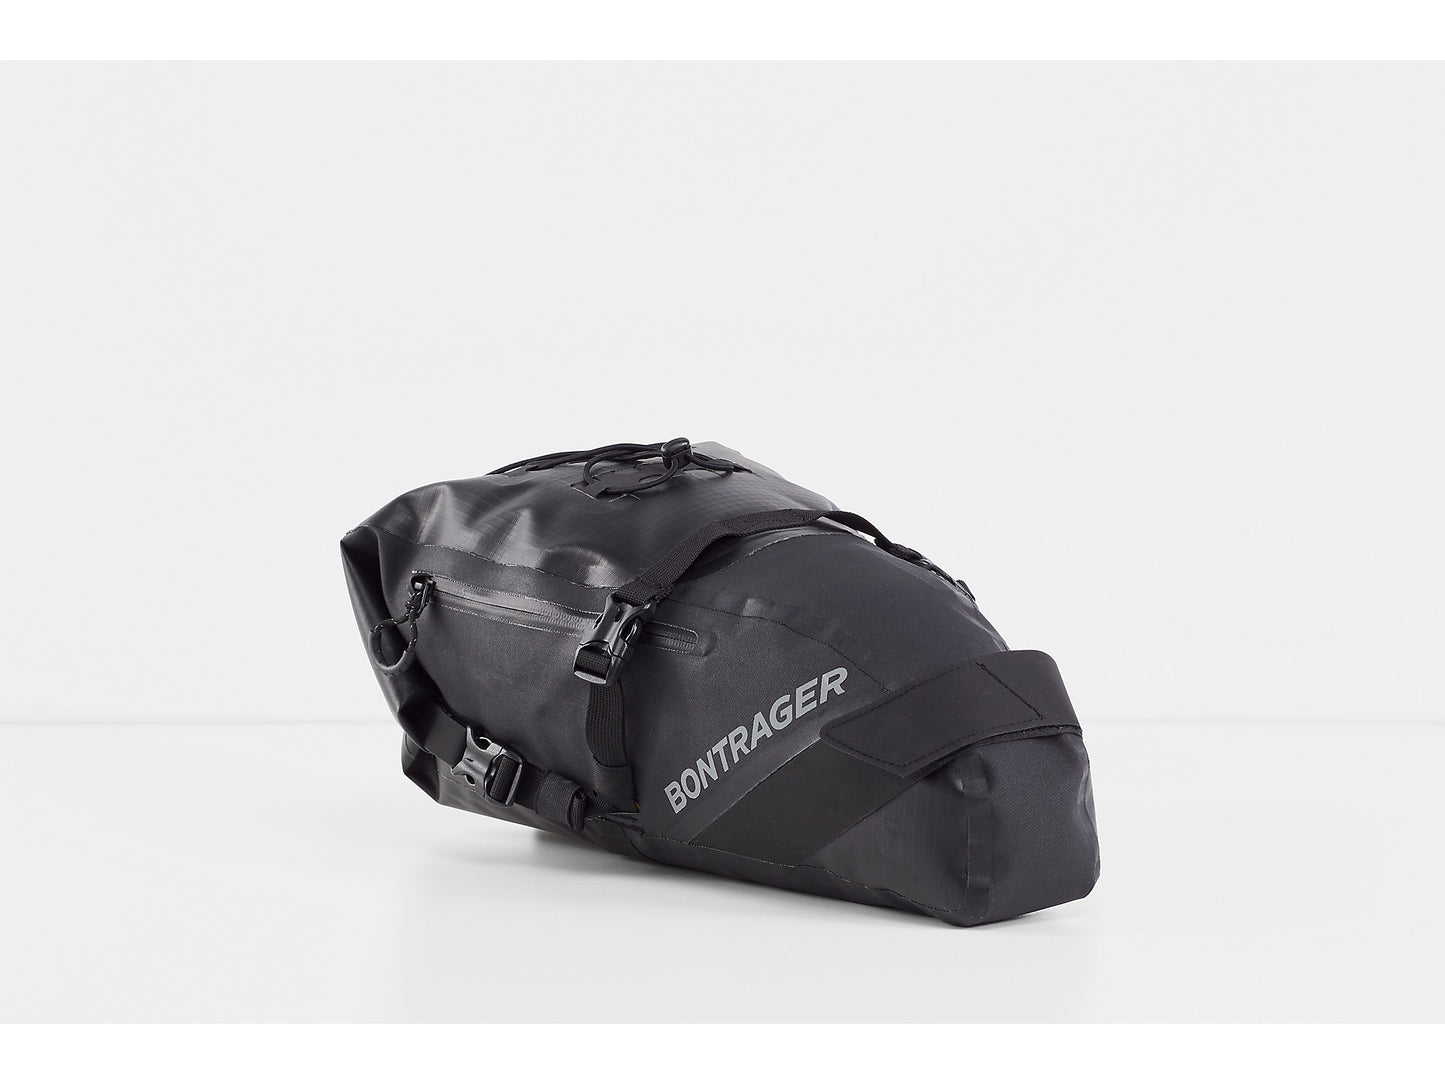 Bontrager Adventure Saddle Bag with a white background